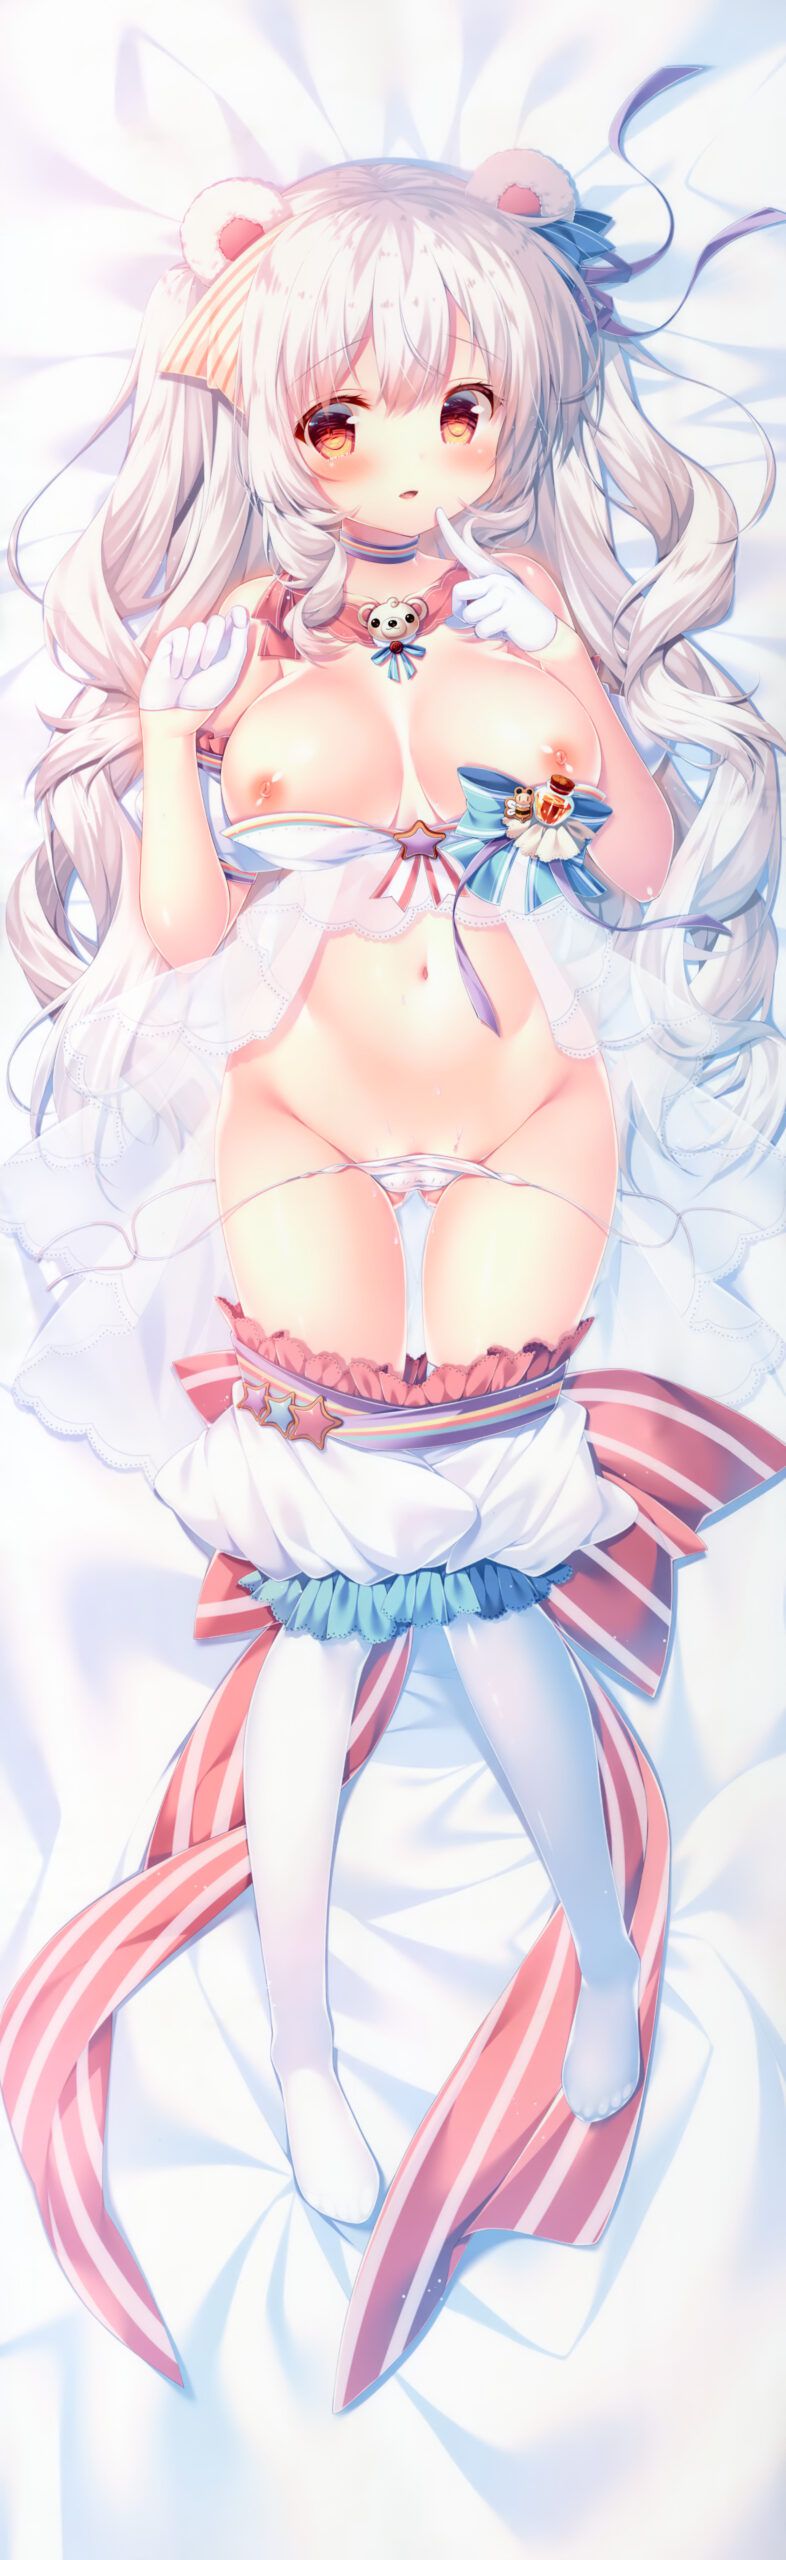 【Hugging Pillow】Images of erotic hugging pillowcases from anime and video games Part 144 38